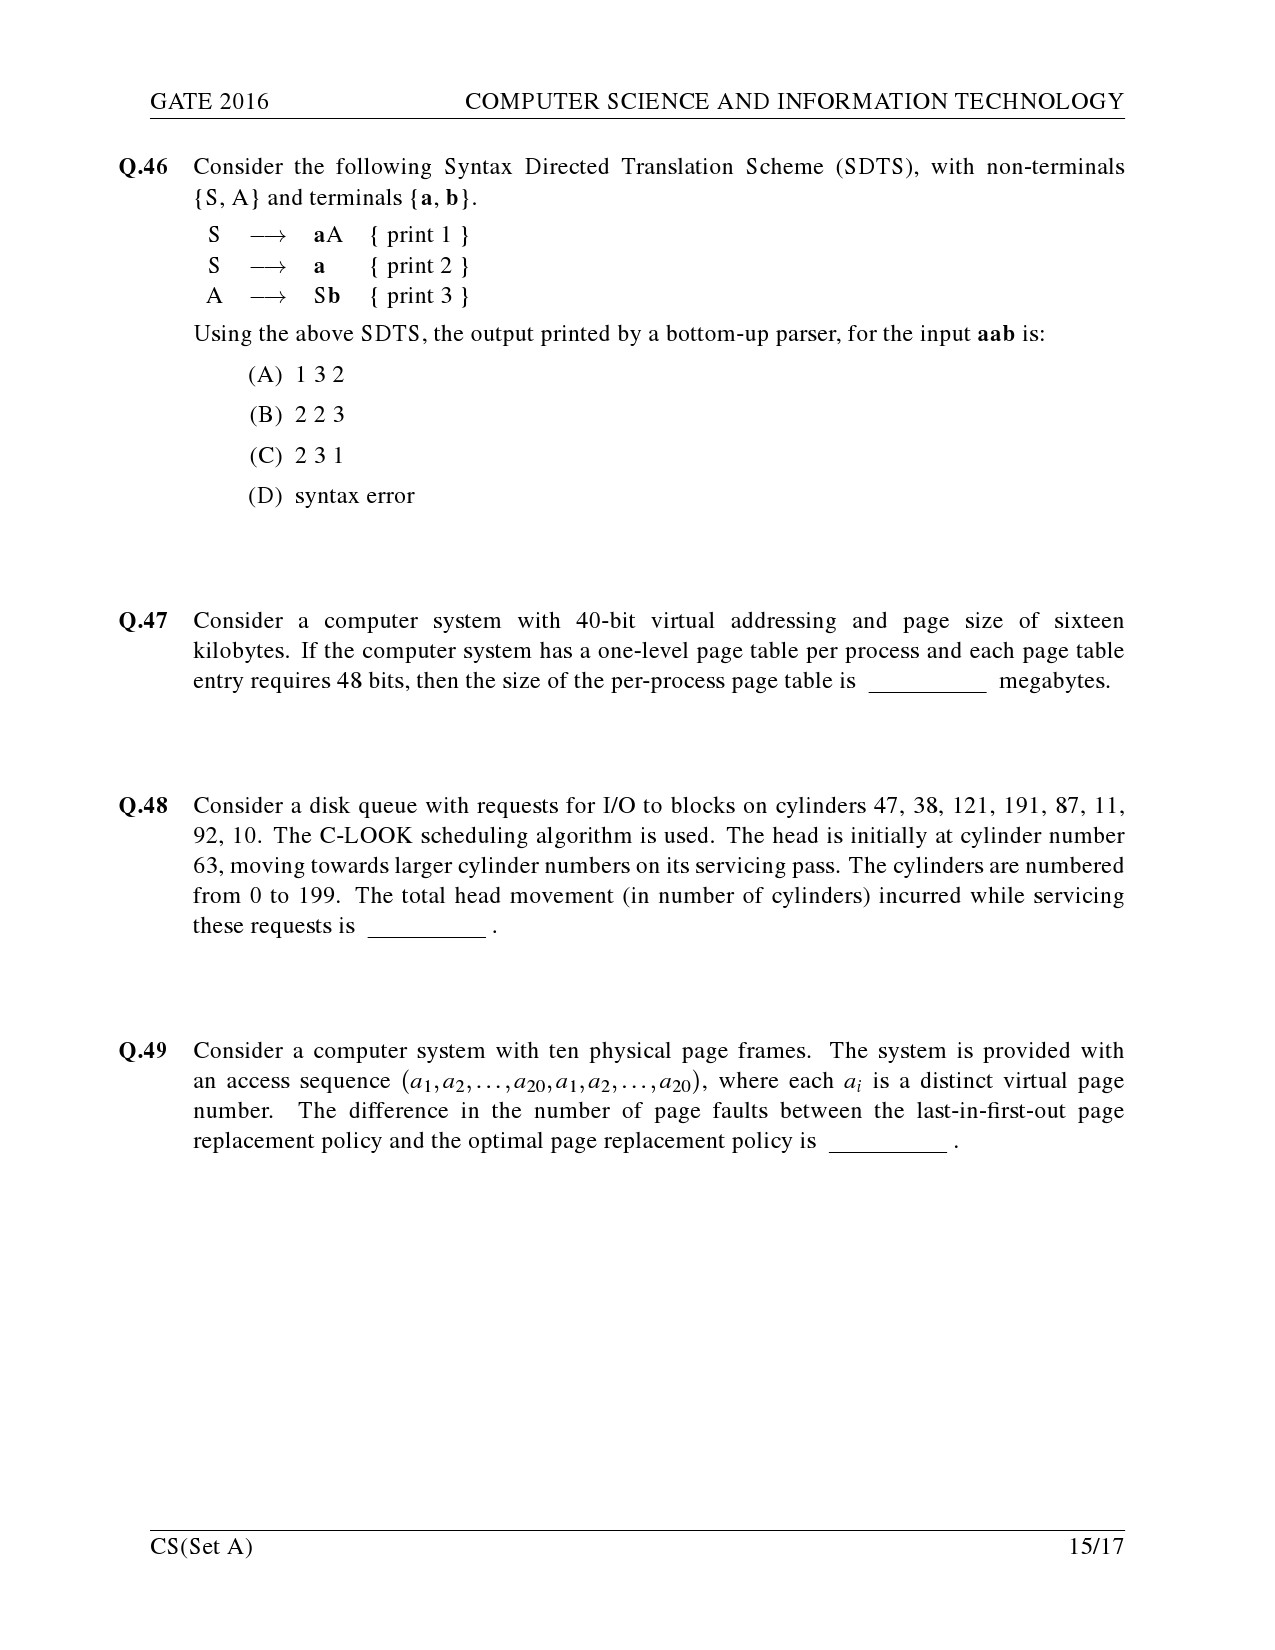 GATE Exam Question Paper 2016 Computer Science and Information Technology Set A 18